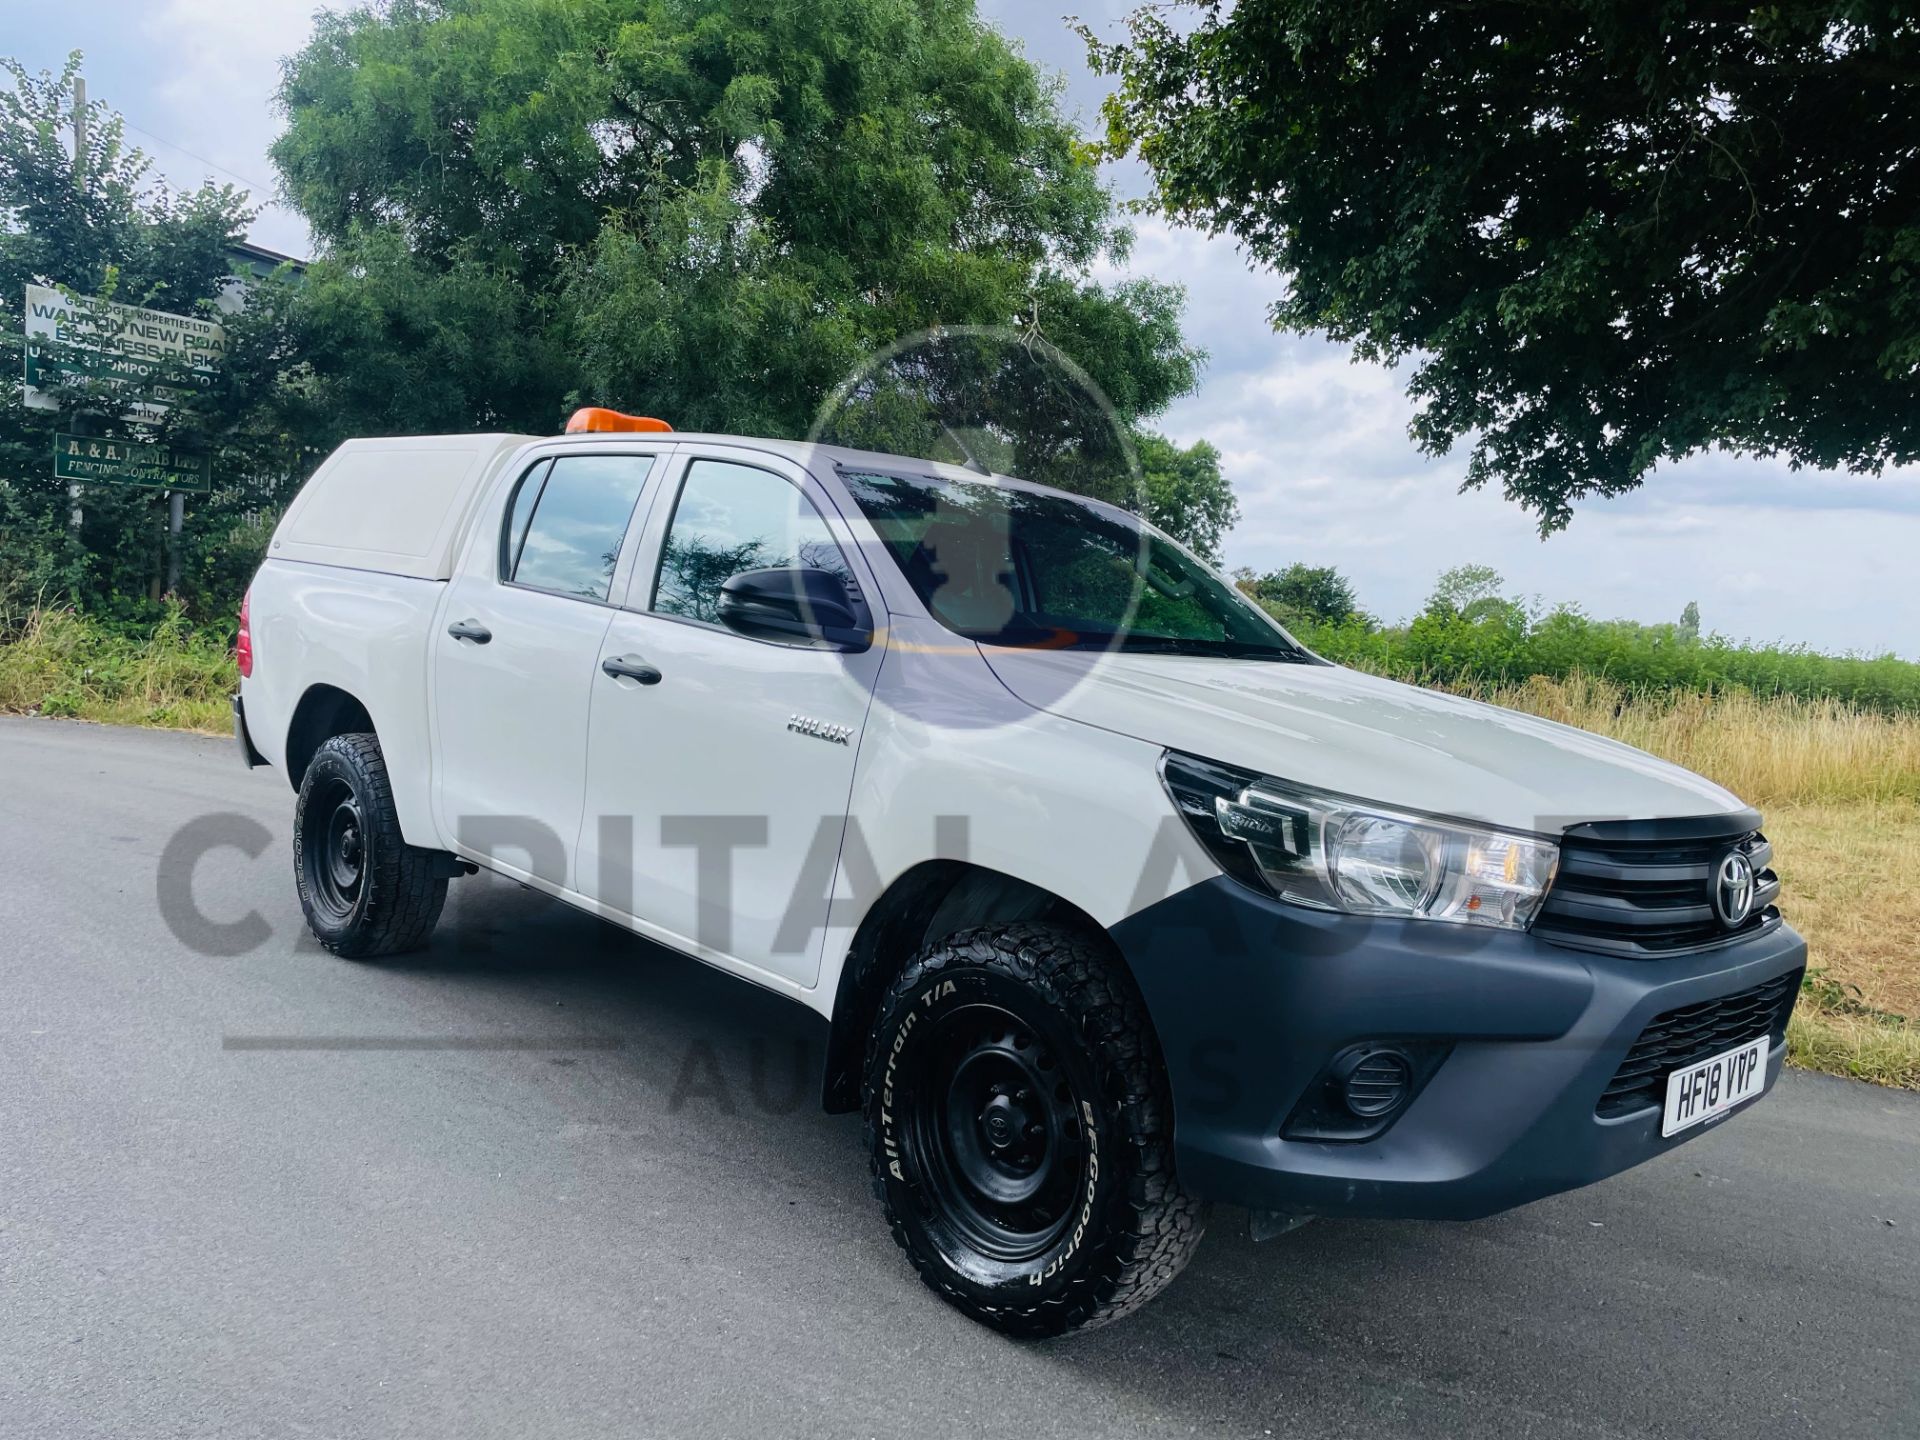 TOYOTA HILUX *DOUBLE CAB PICK-UP* (2018 - EURO 6) 2.4 D4-D - 6 SPEED (1 OWNER) *ULTRA LOW MILES* - Image 13 of 40